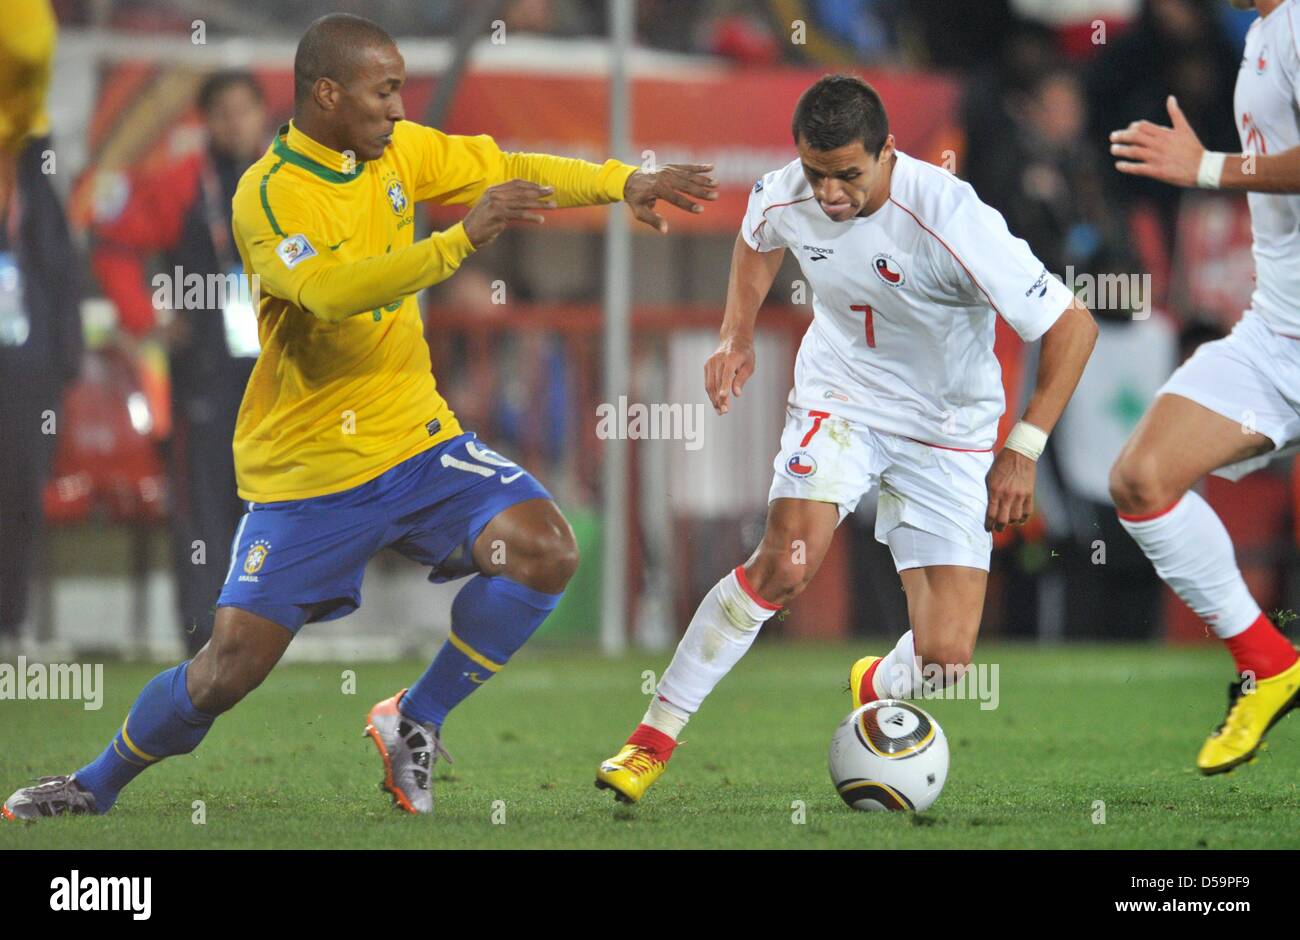 Gilberto Melo (L) of Brazil vies with Alexis Sanchez (C) of Chile during the 2010 FIFA World Cup Round of Sixteen match between Brazil and Chile at the Ellis Park Stadium in Johannesburg, South Africa 28 June 2010. Photo: Bernd Weissbrod dpa - Please refer to http://dpaq.de/FIFA-WM2010-TC Stock Photo